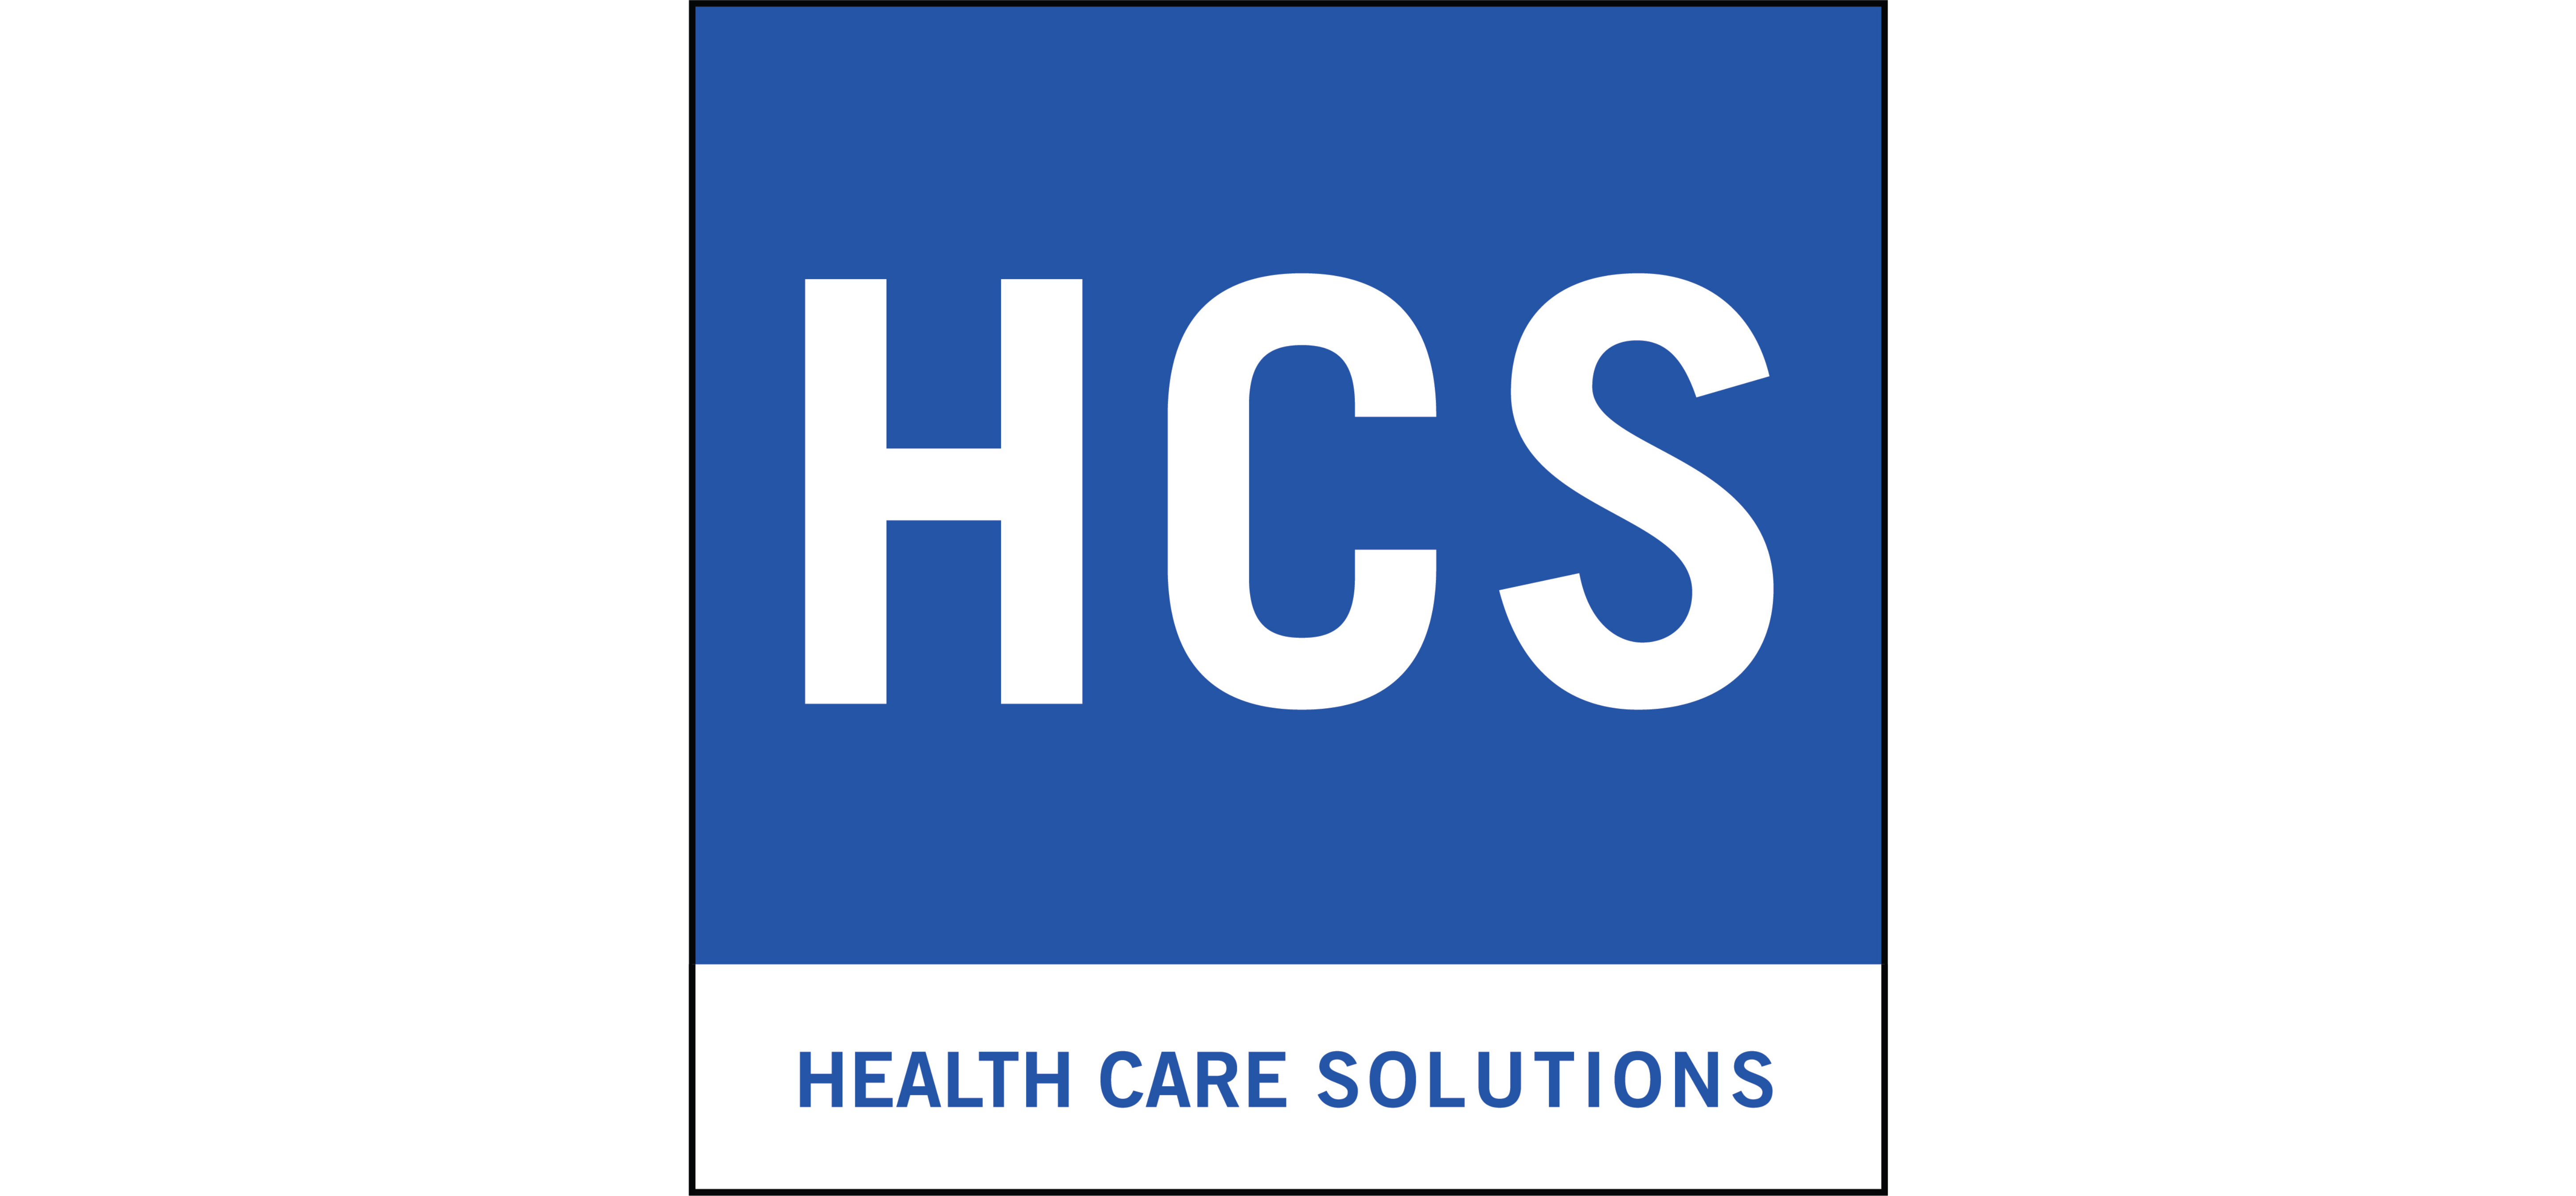 Health Care Solutions